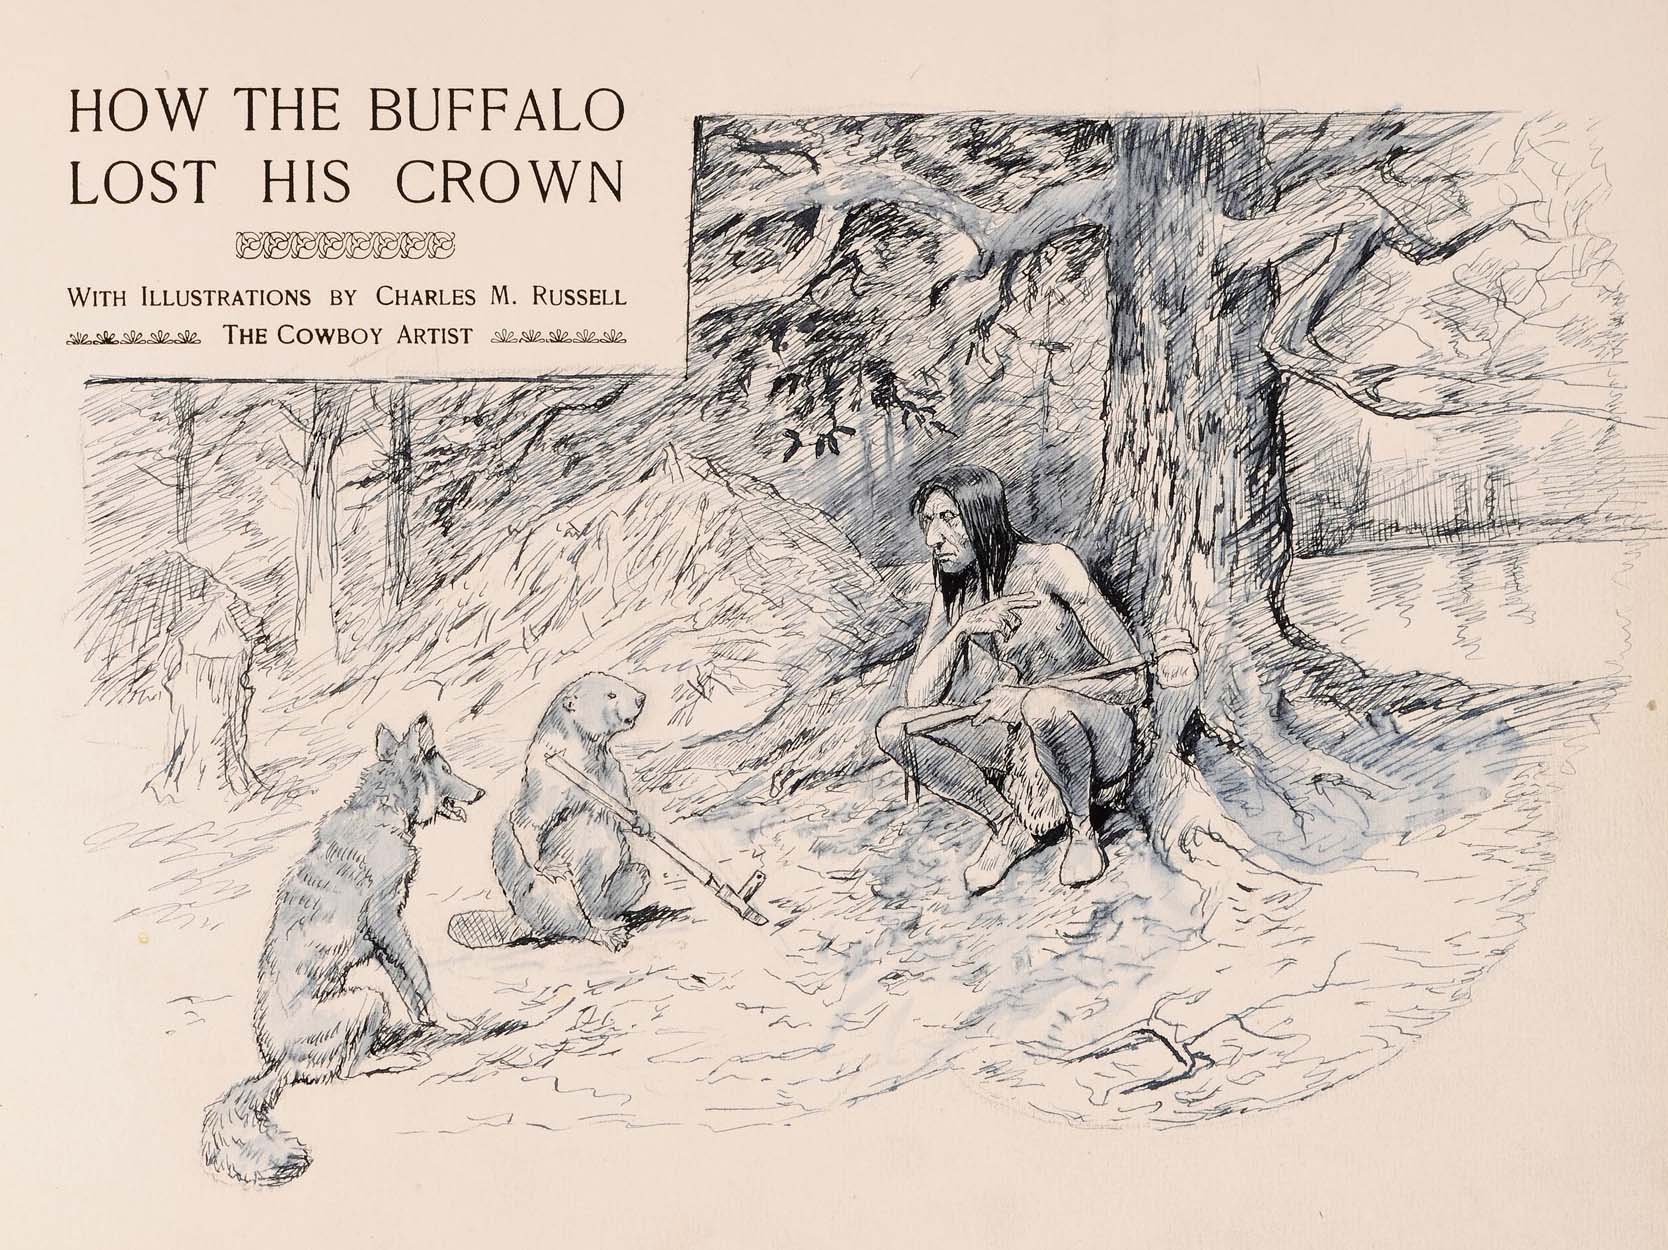 How the Buffalo Lost His Crown